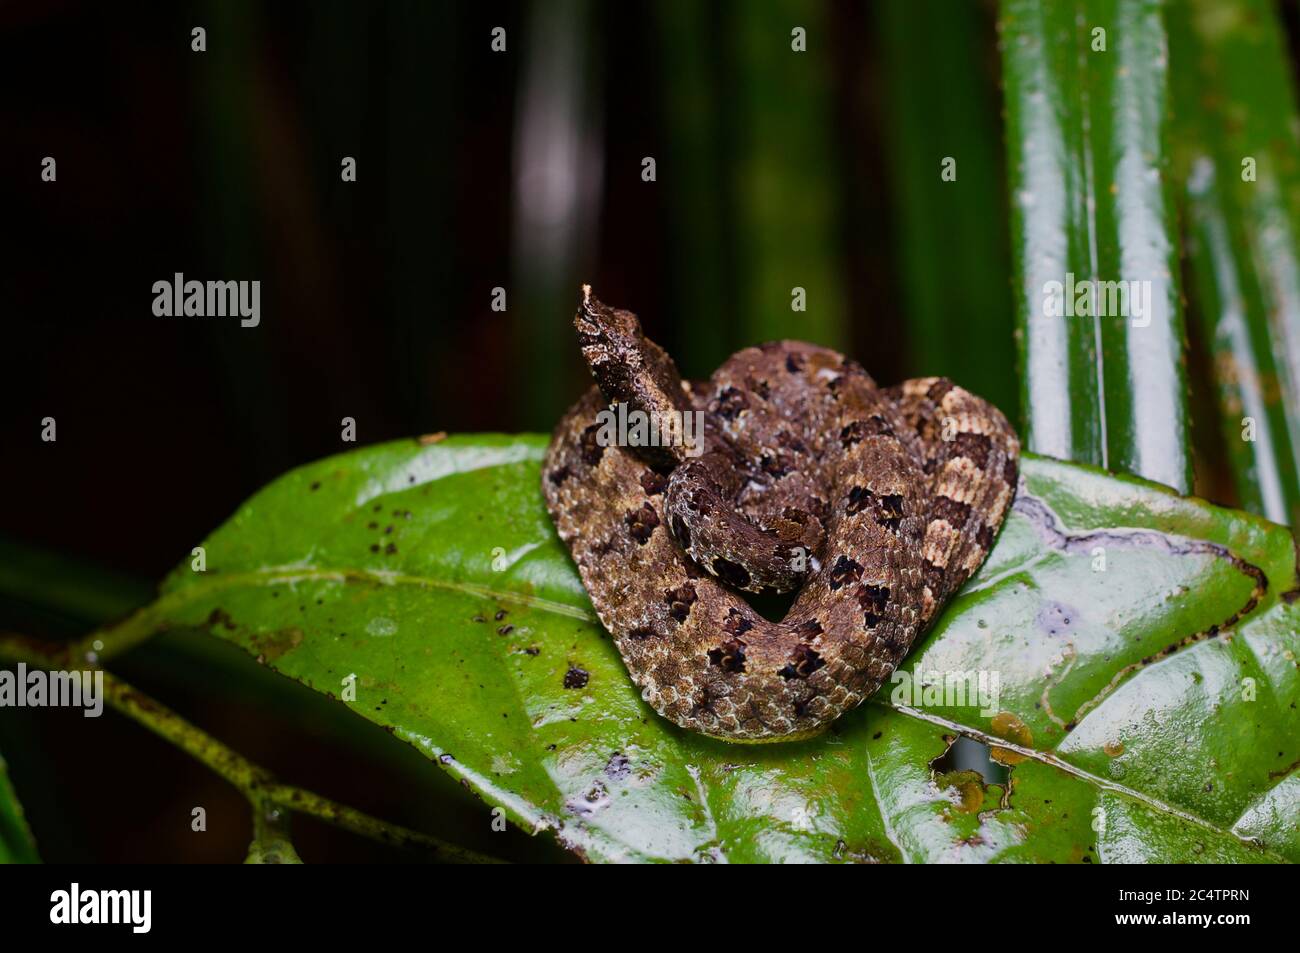 A juvenile Lowland Hump-nosed Viper (Hypnale zara) on a wet leaf in the lowland rainforest of Kalutara, Sri Lanka Stock Photo